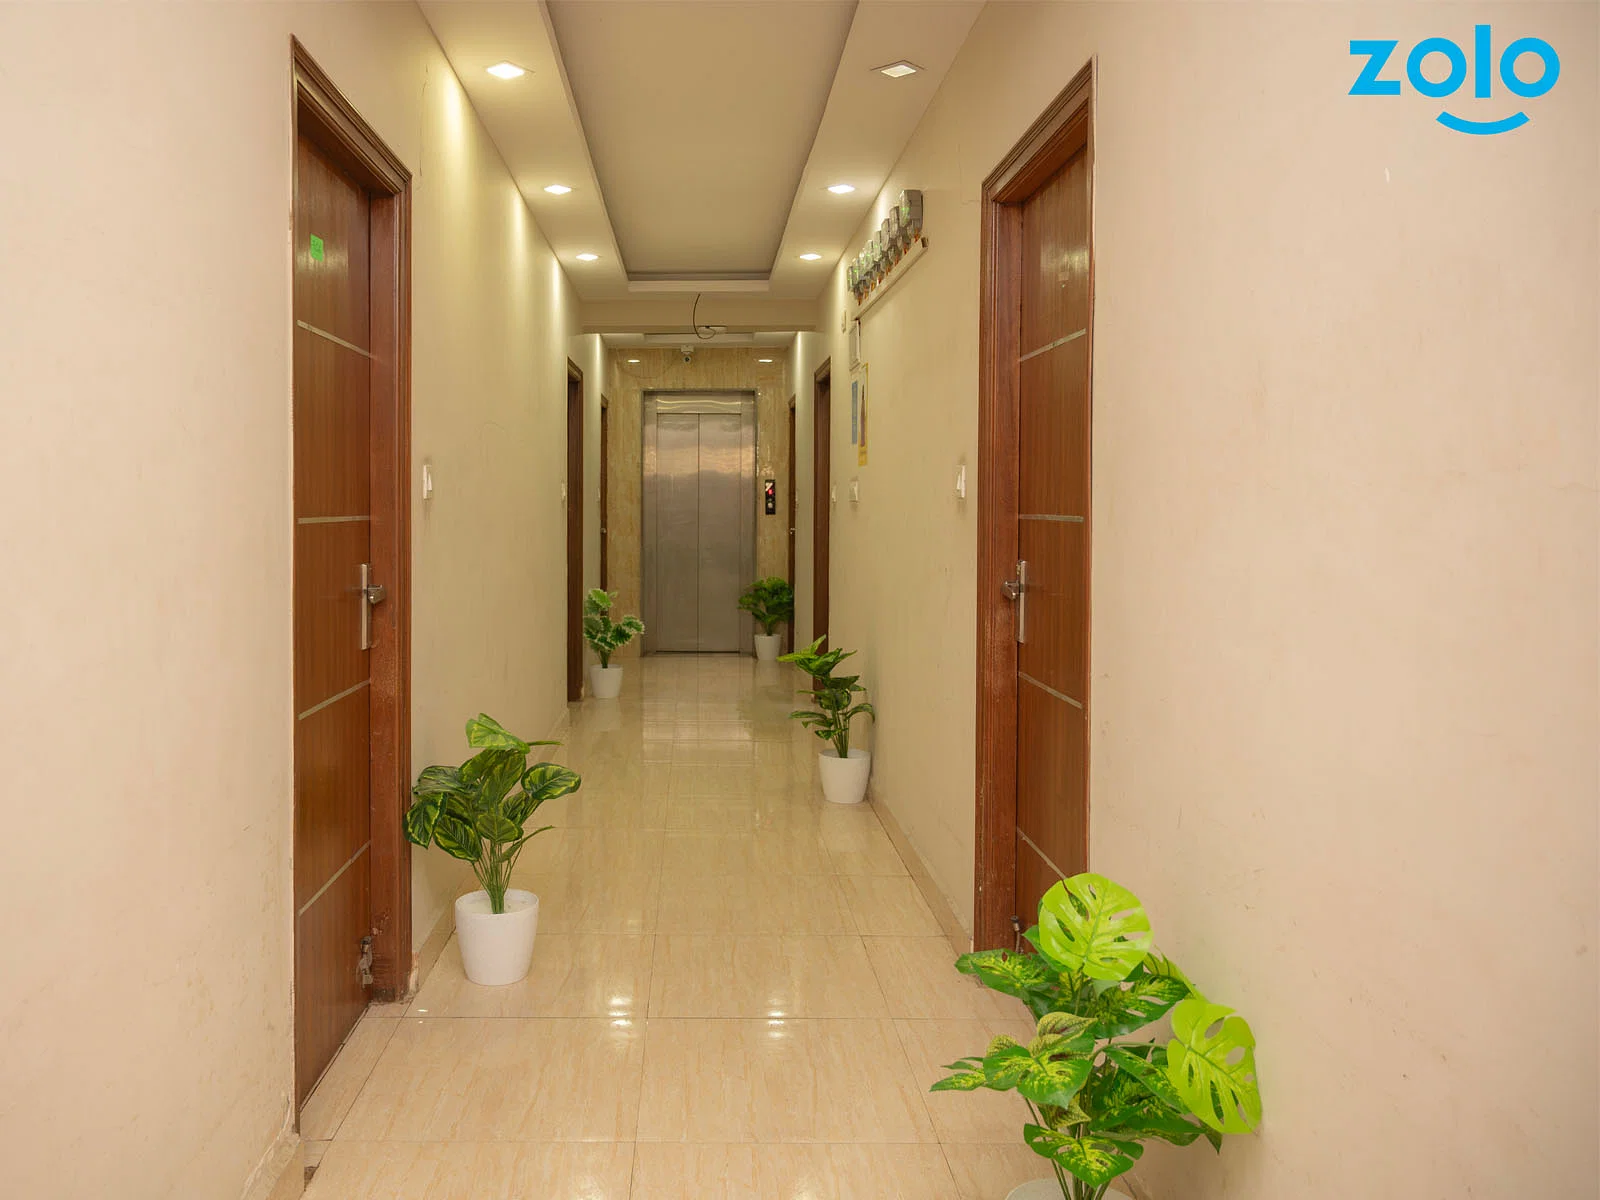 budget-friendly PGs and hostels for boys and girls with single rooms with daily hopusekeeping-Zolo Maple